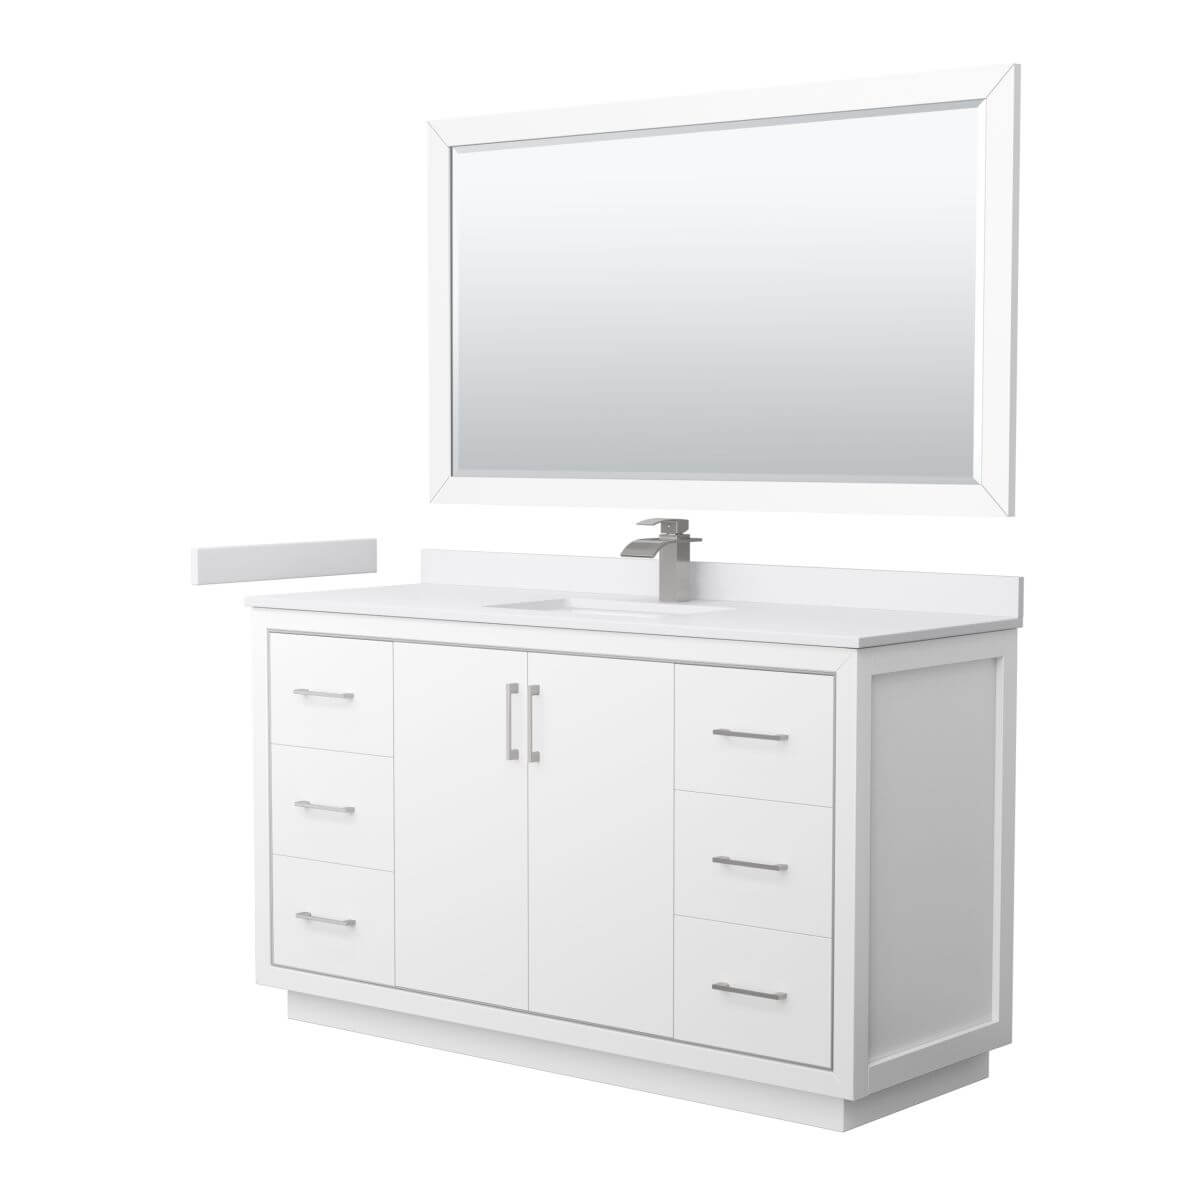 Wyndham Collection WCF111160SWHWCUNSM58 Icon 60 inch Single Bathroom Vanity in White with White Cultured Marble Countertop, Undermount Square Sink, Brushed Nickel Trim and 58 Inch Mirror